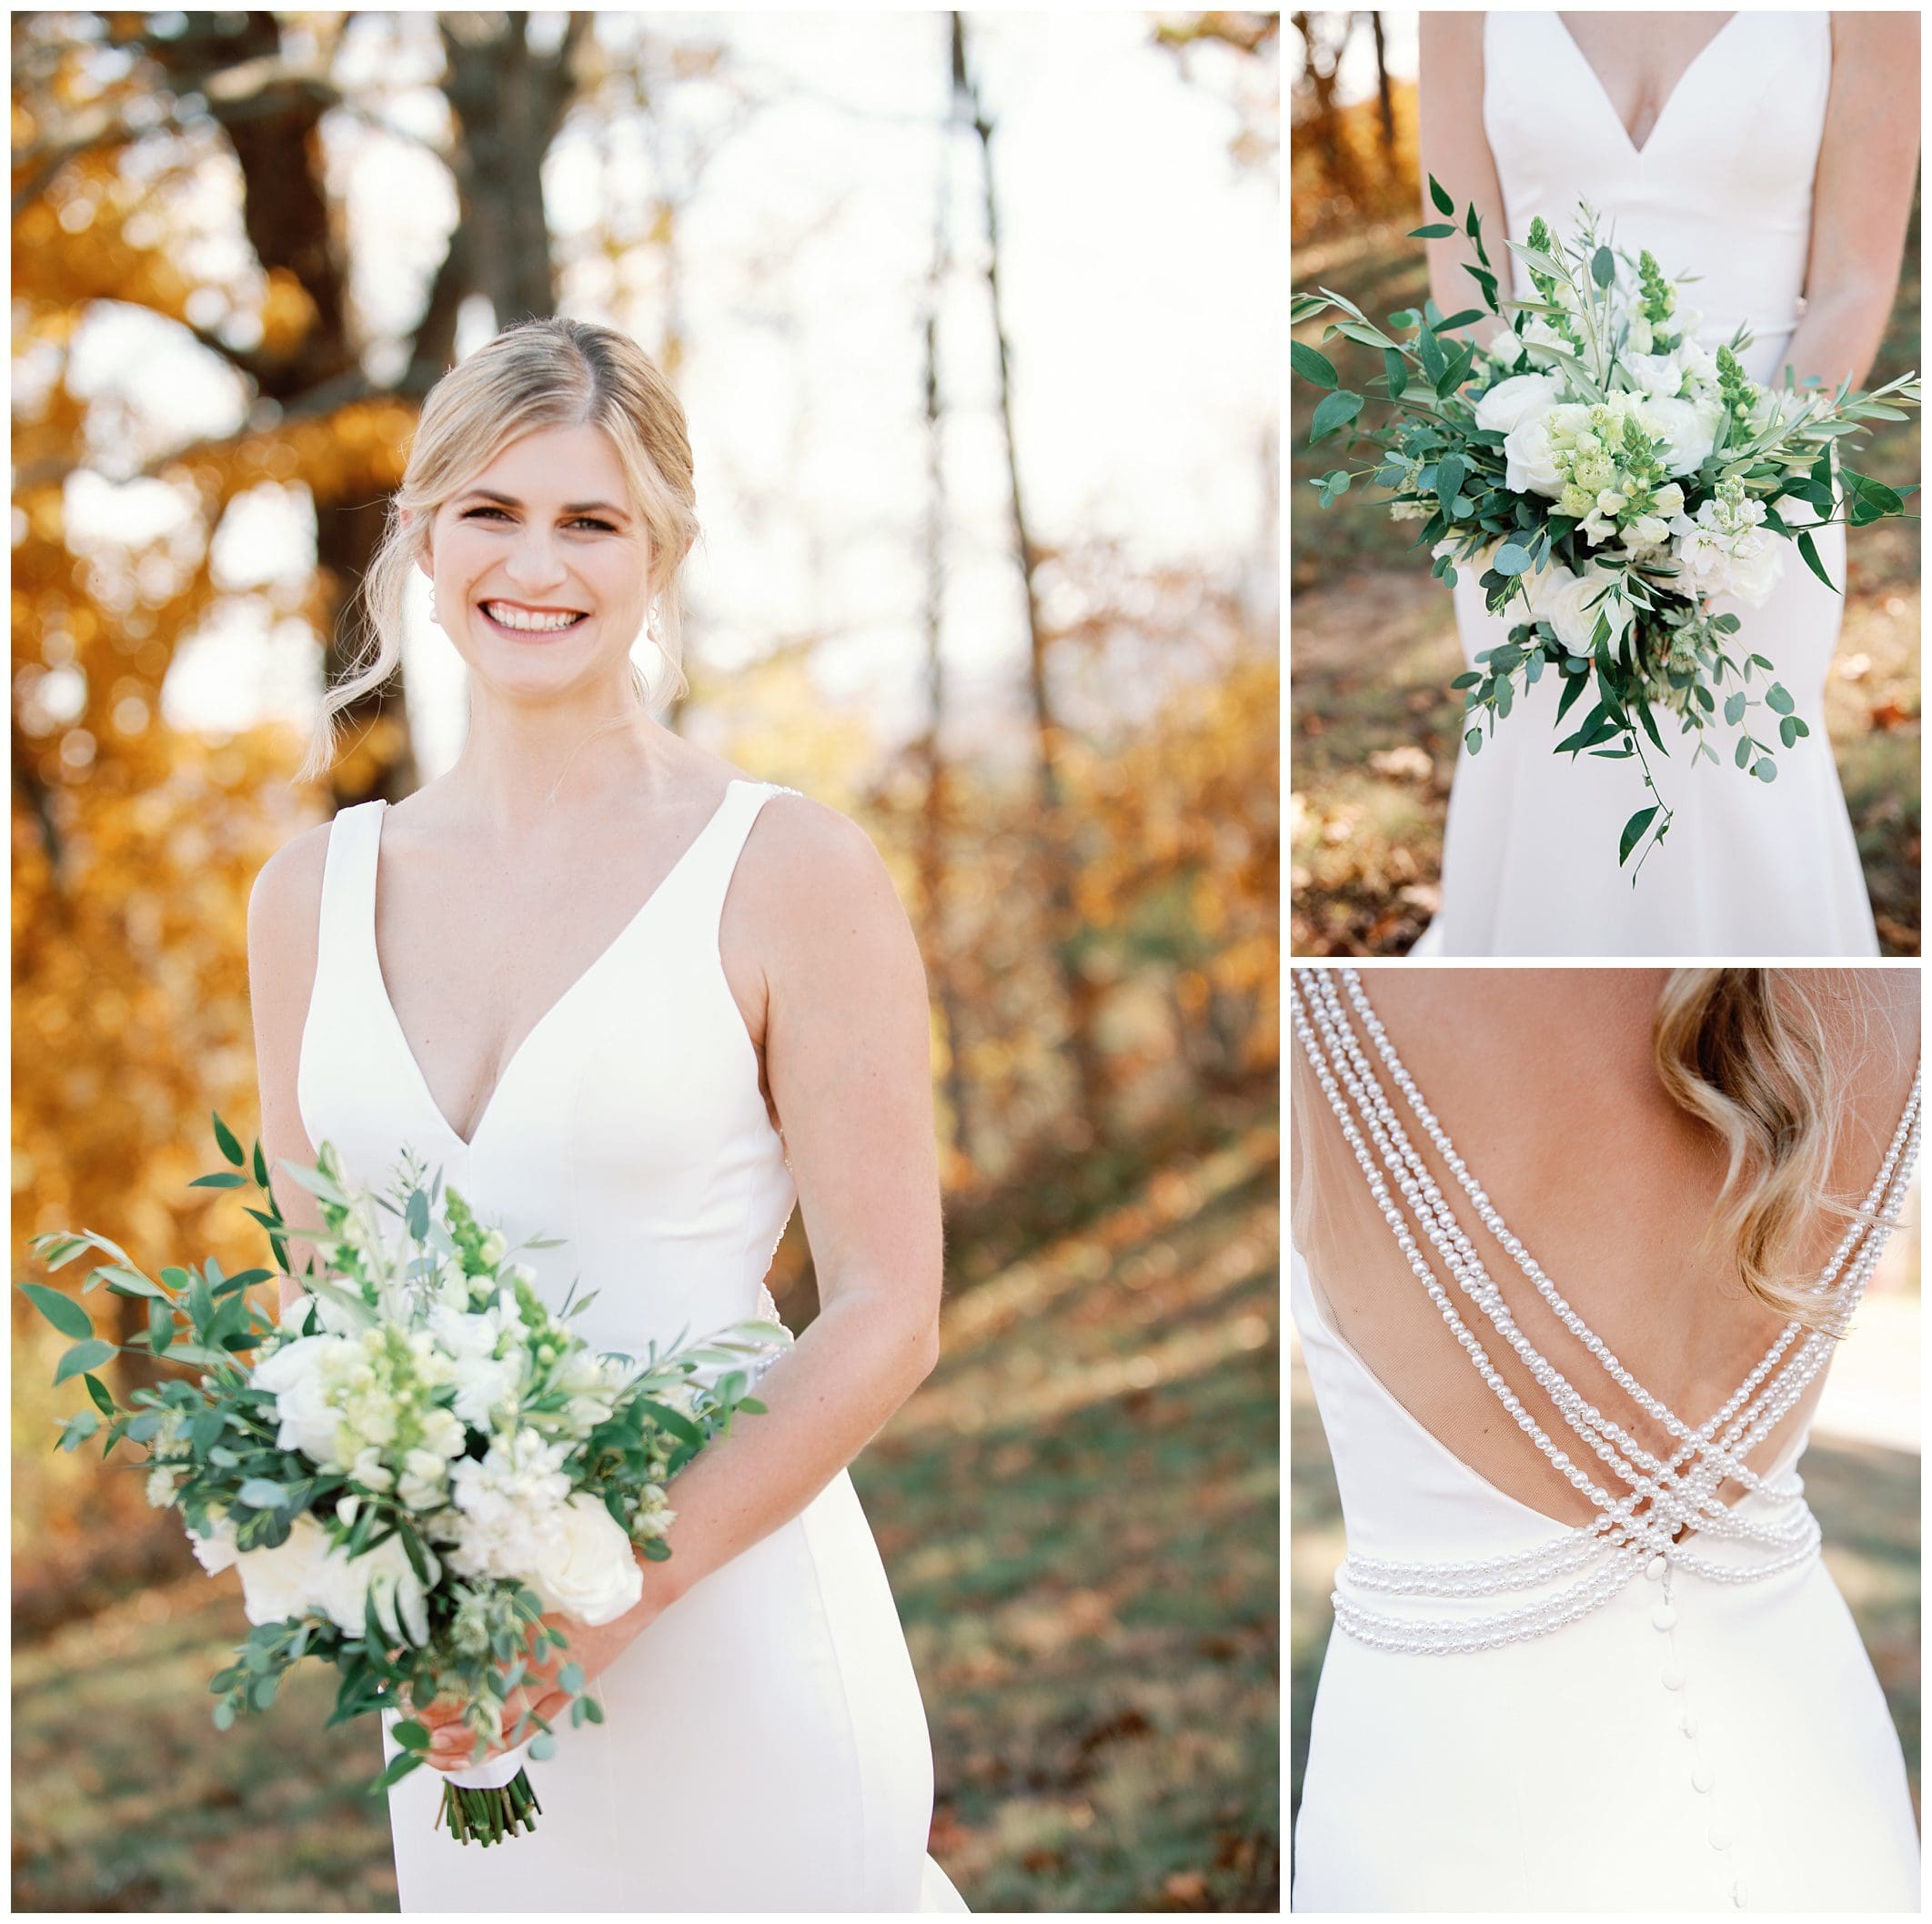 A bride in a white dress holding a bouquet at a fall wedding ceremony.